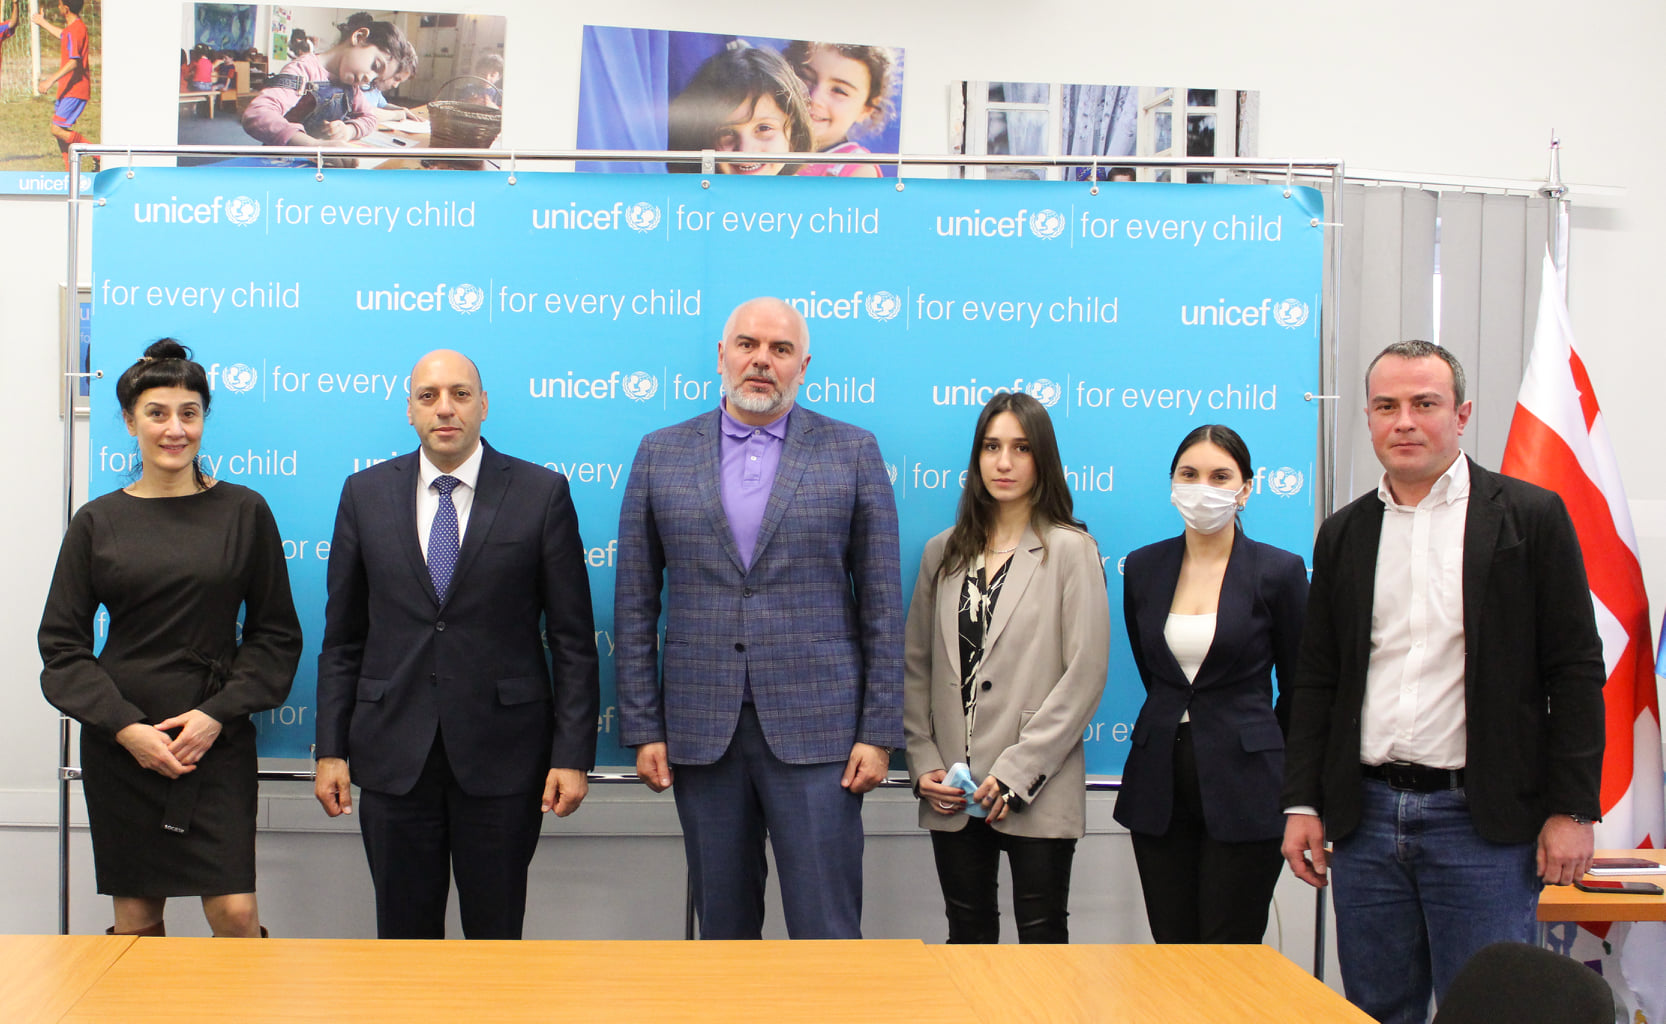 Meeting with Mr. Ghassan Khalil, the Executive Director of UNICEF